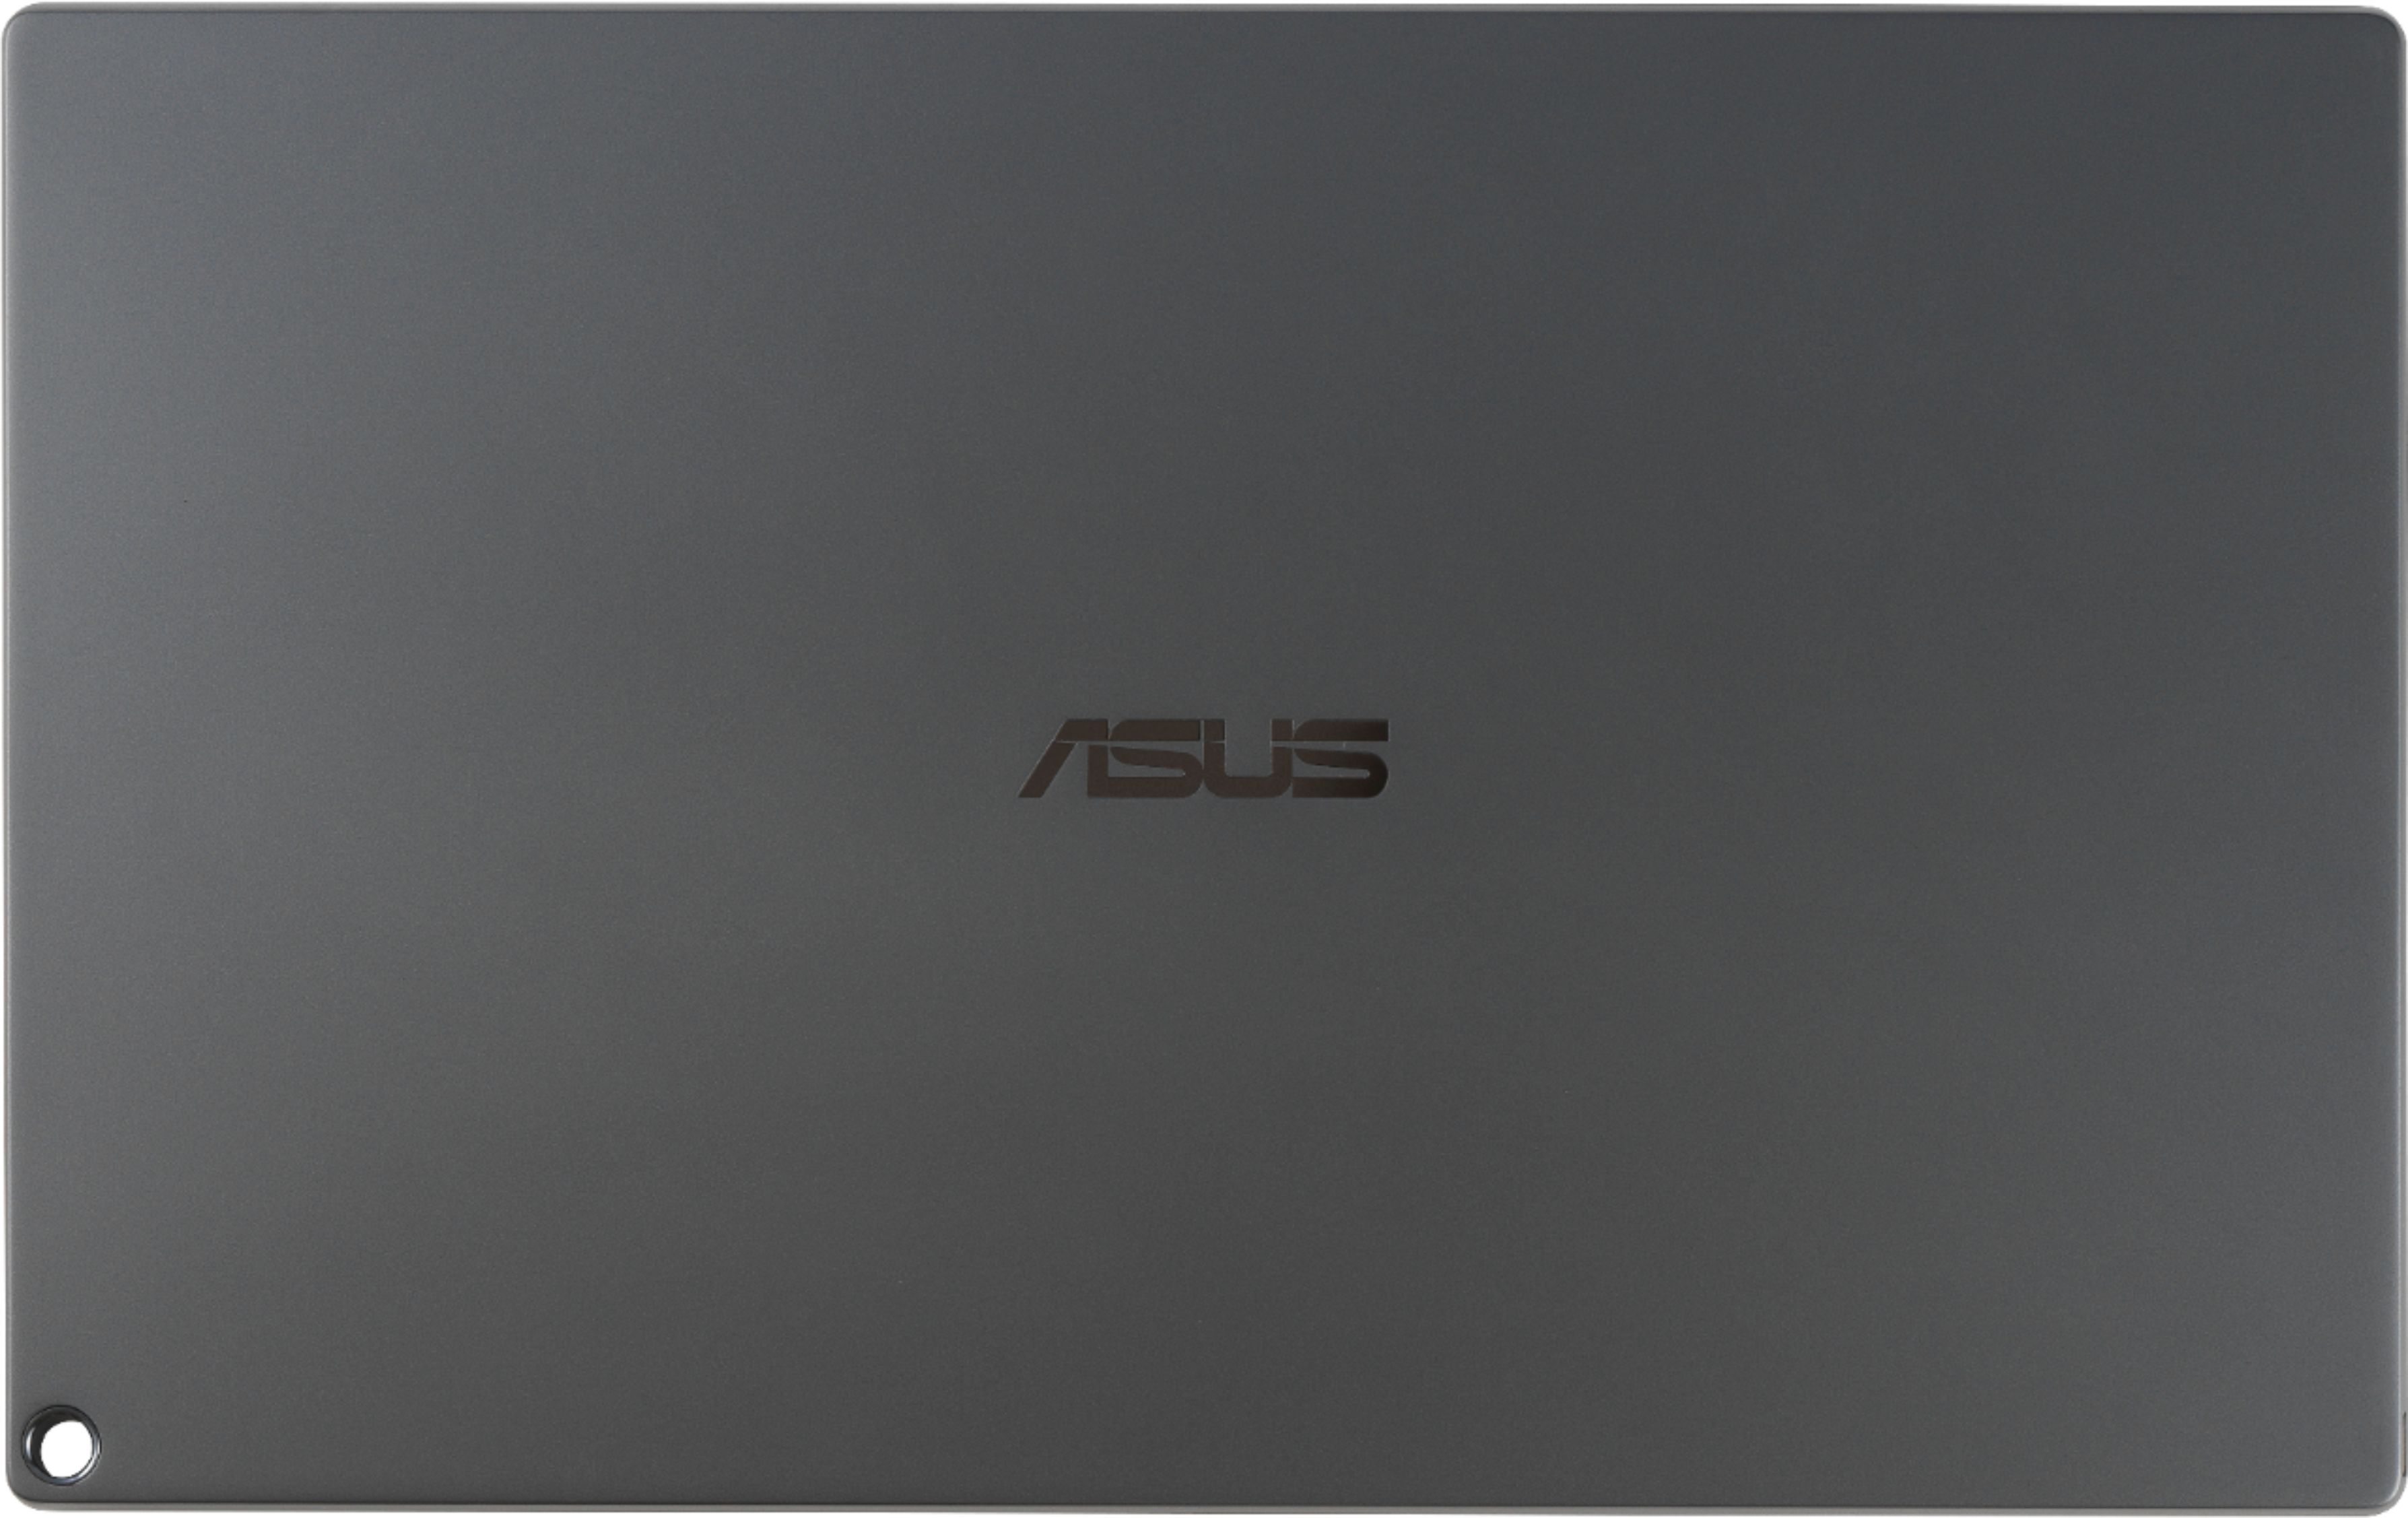 Back View: ASUS - ZenScreen 15.6” IPS FHD USB Type-C Portable Monitor with Foldable Smart Case - Dark Gray